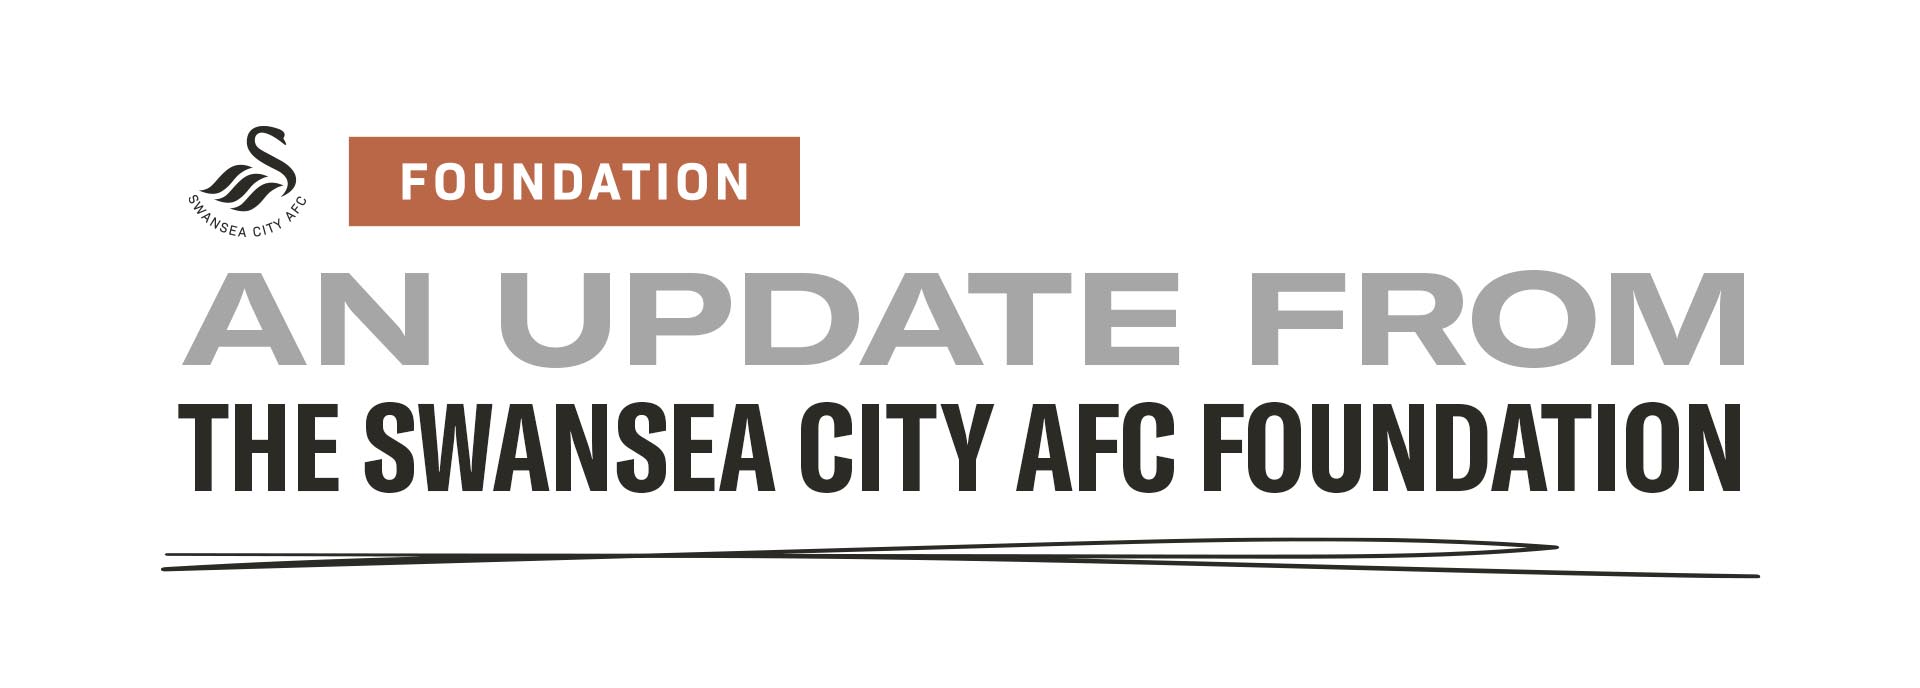 An update from the Swansea City Foundation